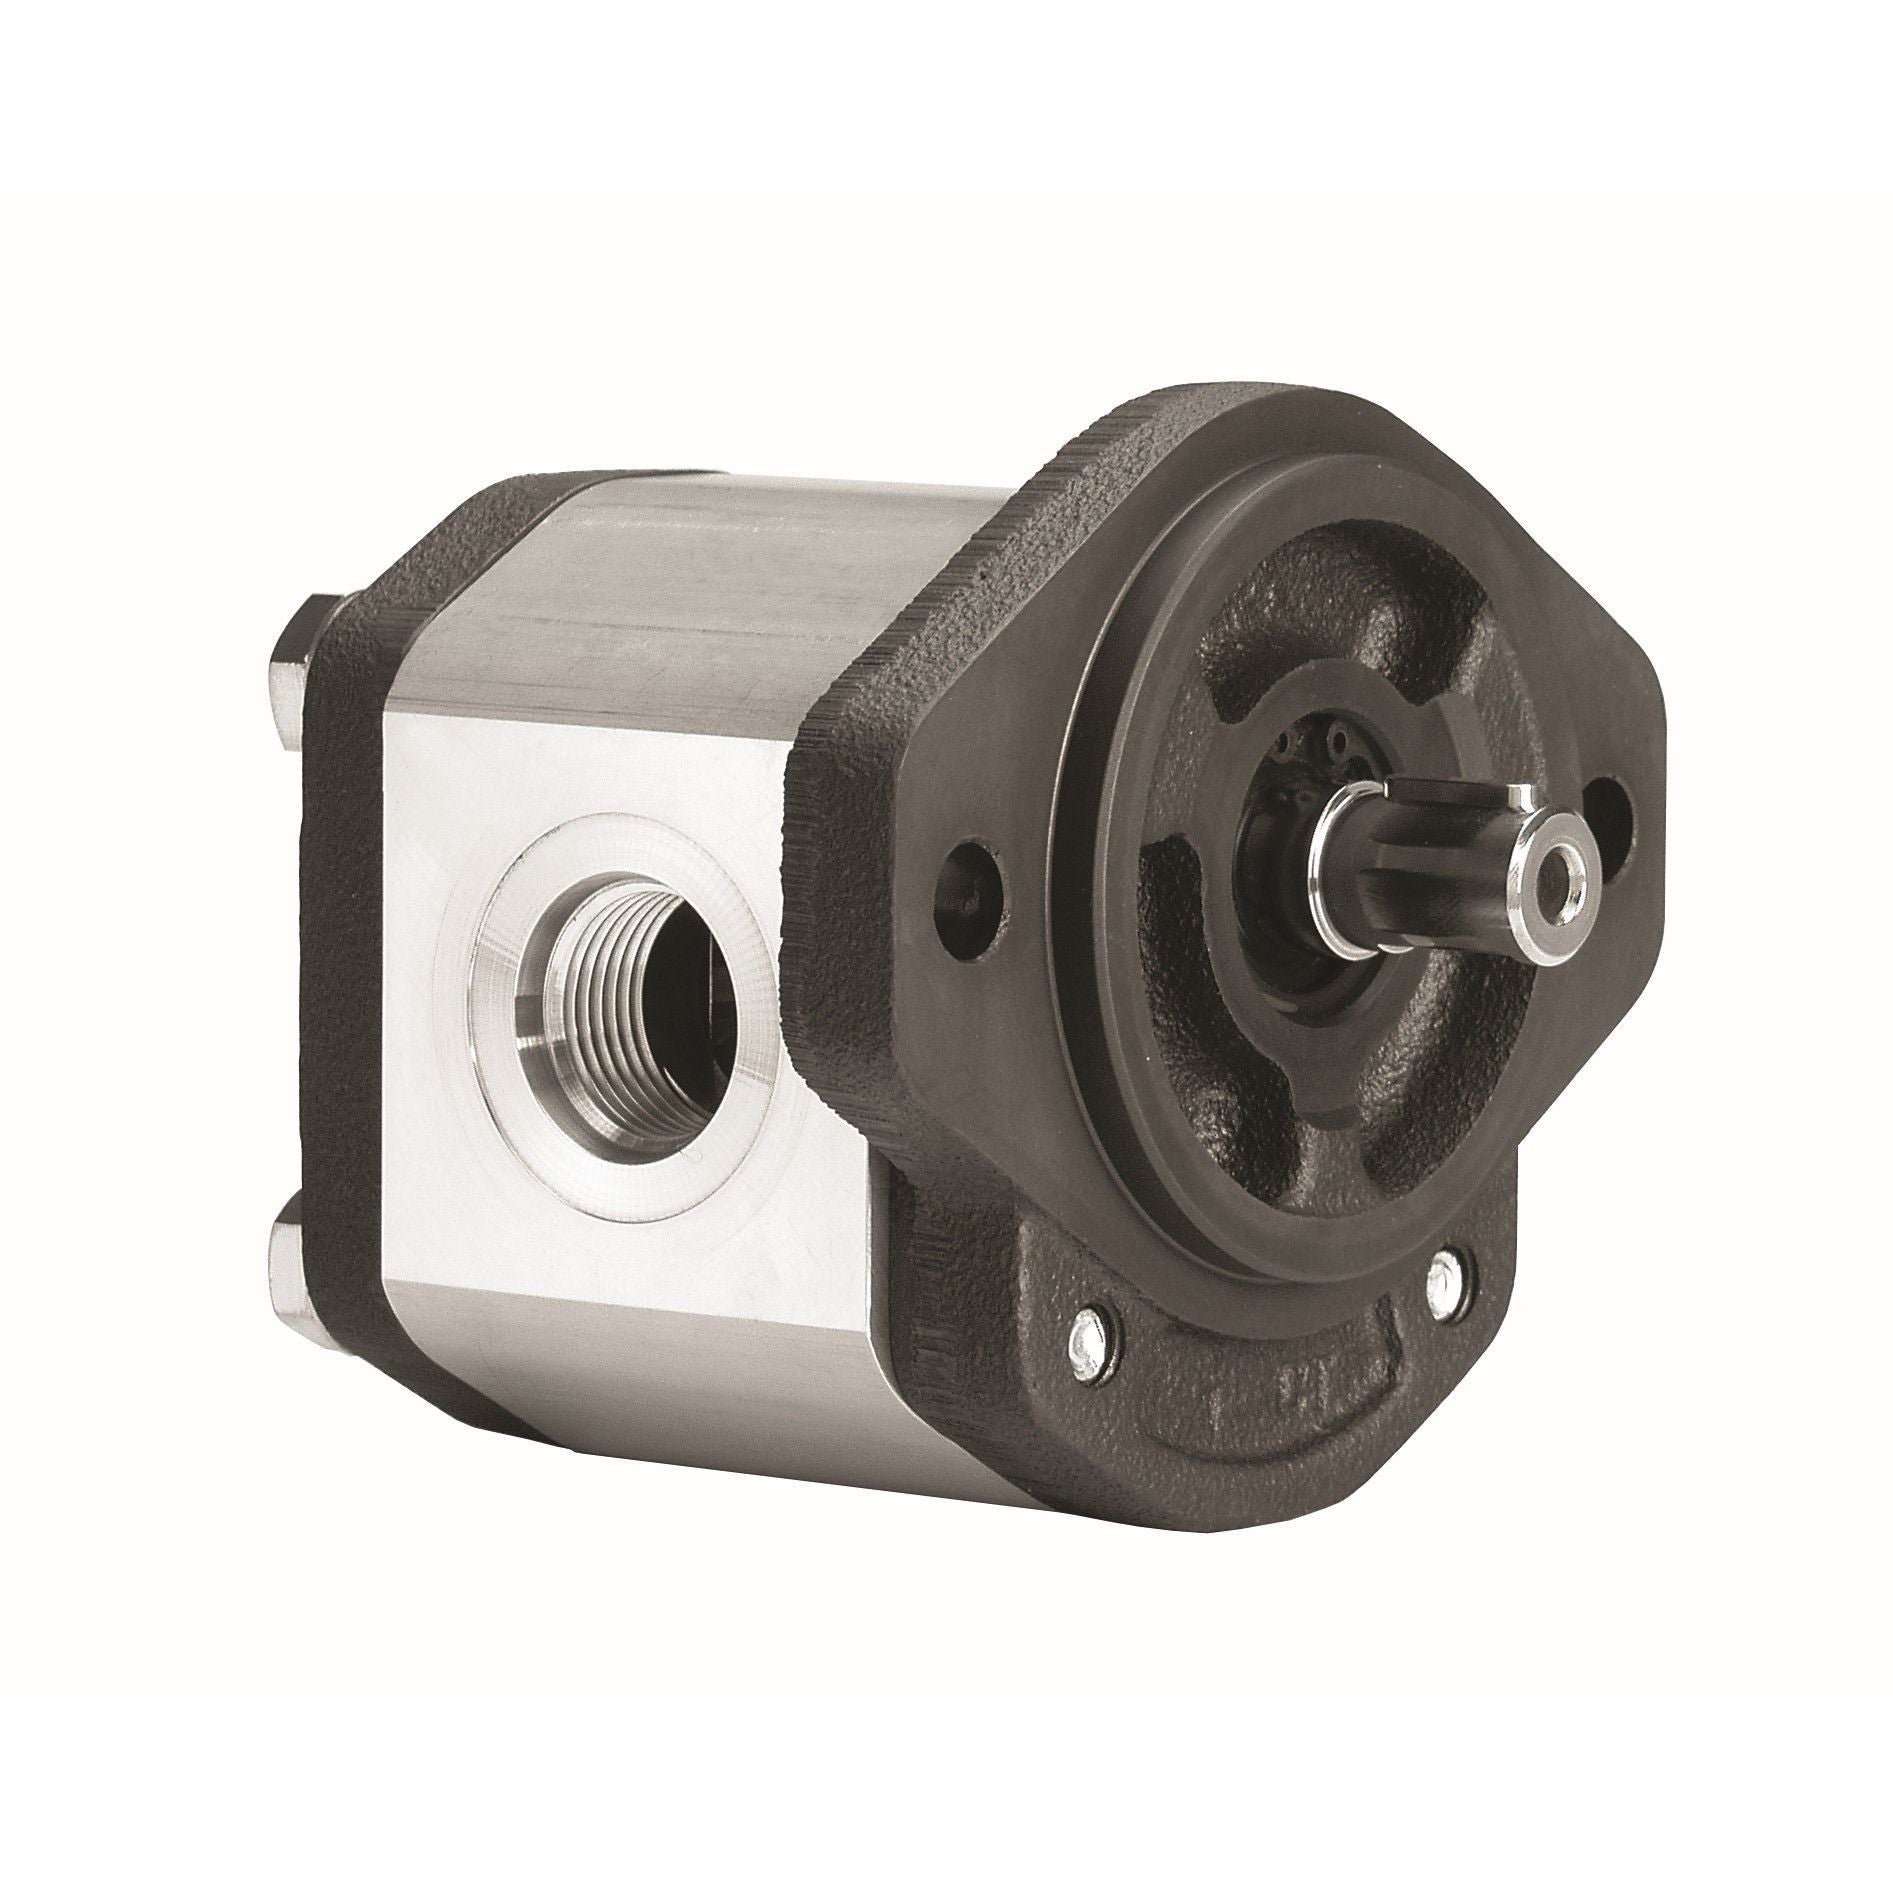 GHP2A-D-10 : Marzocchi Gear Pump, CW, 7cc (0.427in3), 3.33 GPM, 4060psi, 4000 RPM, #12 SAE (3/4") In, #10 SAE (5/8") Out, Keyed Shaft 5/8" Bore x 5/32" Key, SAE A 2-Bolt Mount